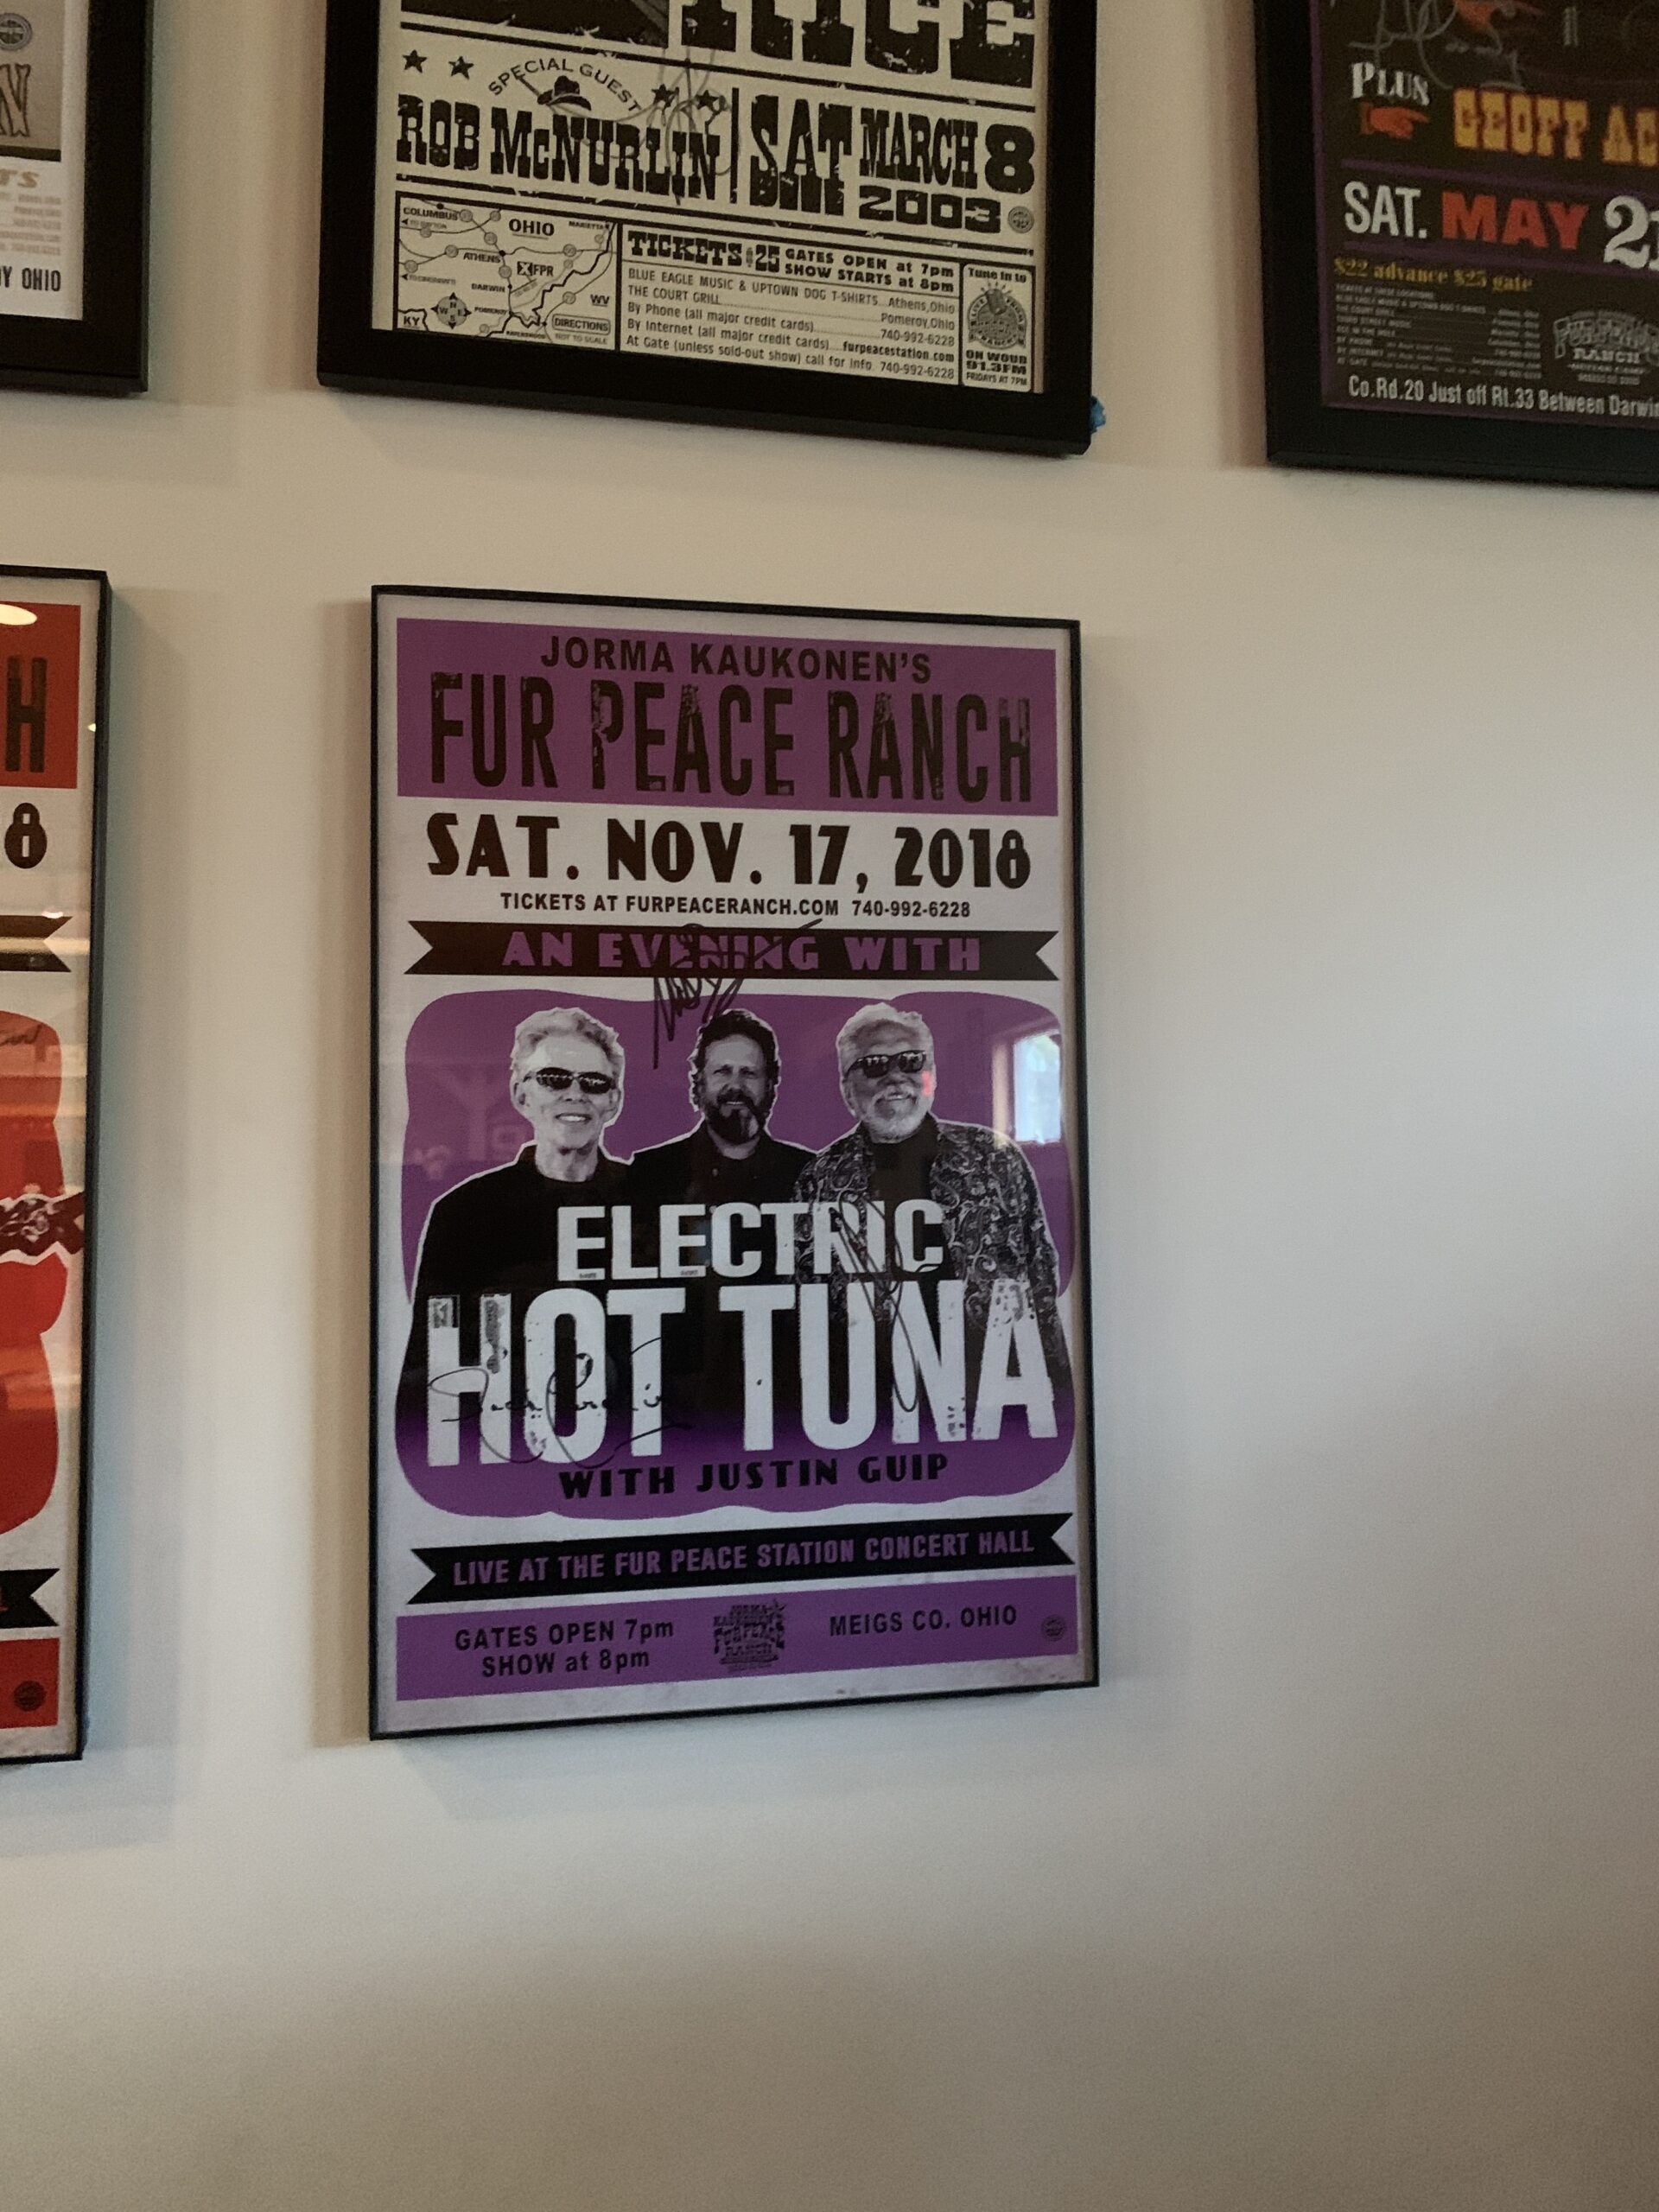 A Hot Tuna poster at Jorma Kaukonen's Fur Peace Ranch in southern Ohio. ANNETTE HINKLE